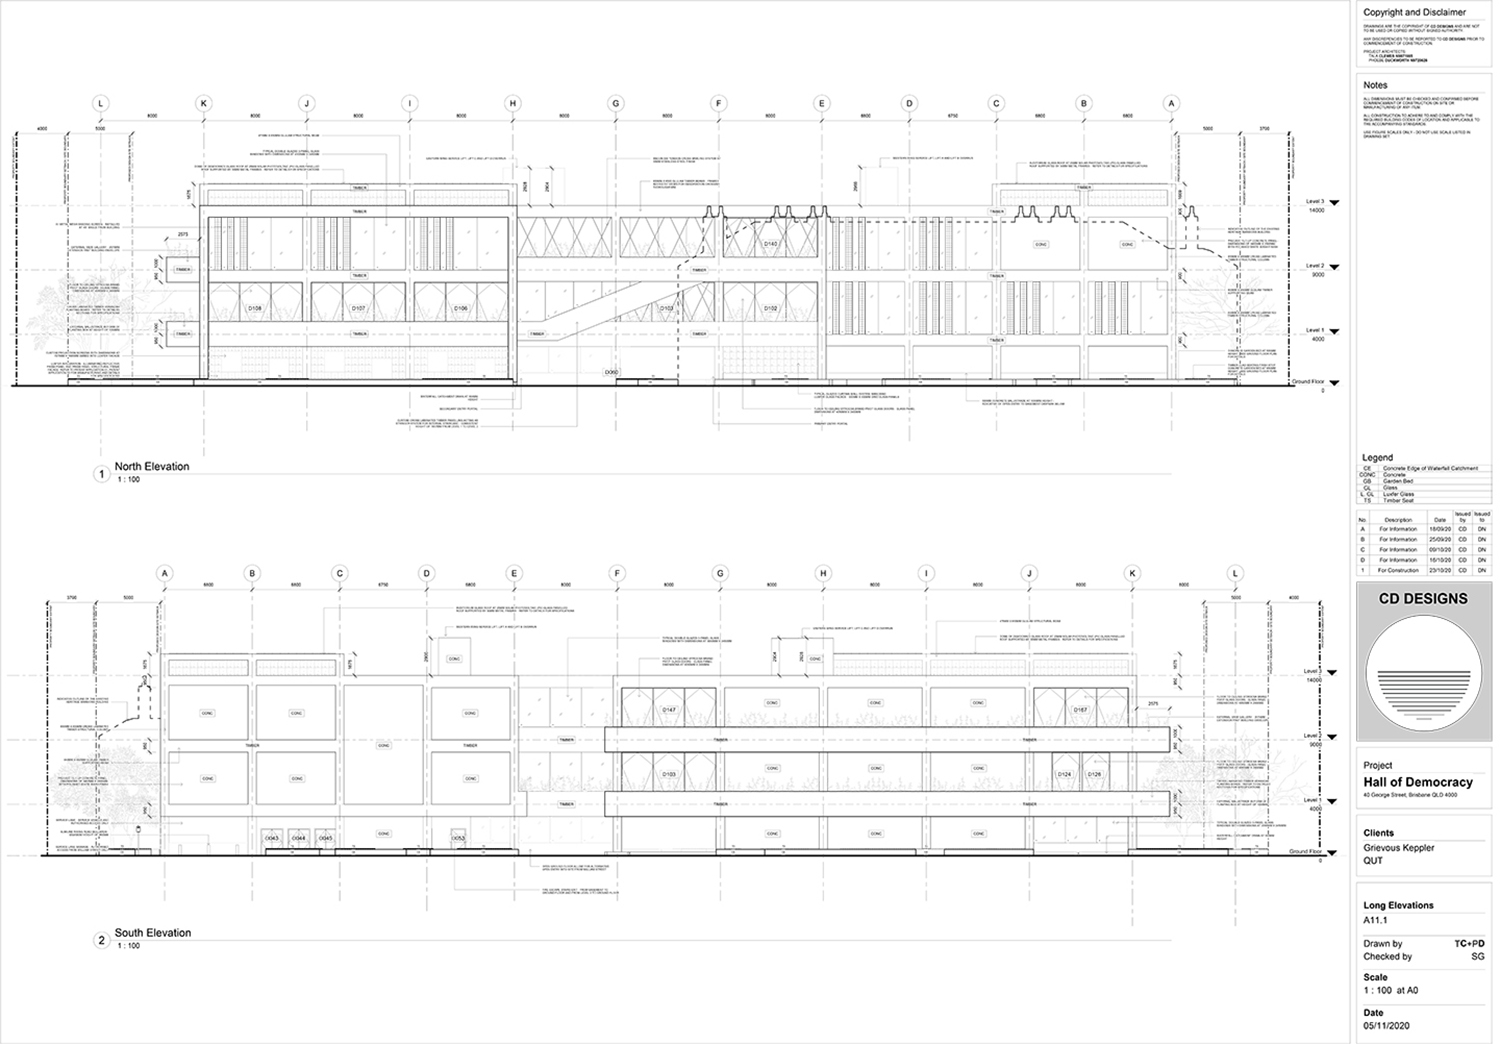 Technical documentation detail - north and south elevations. 